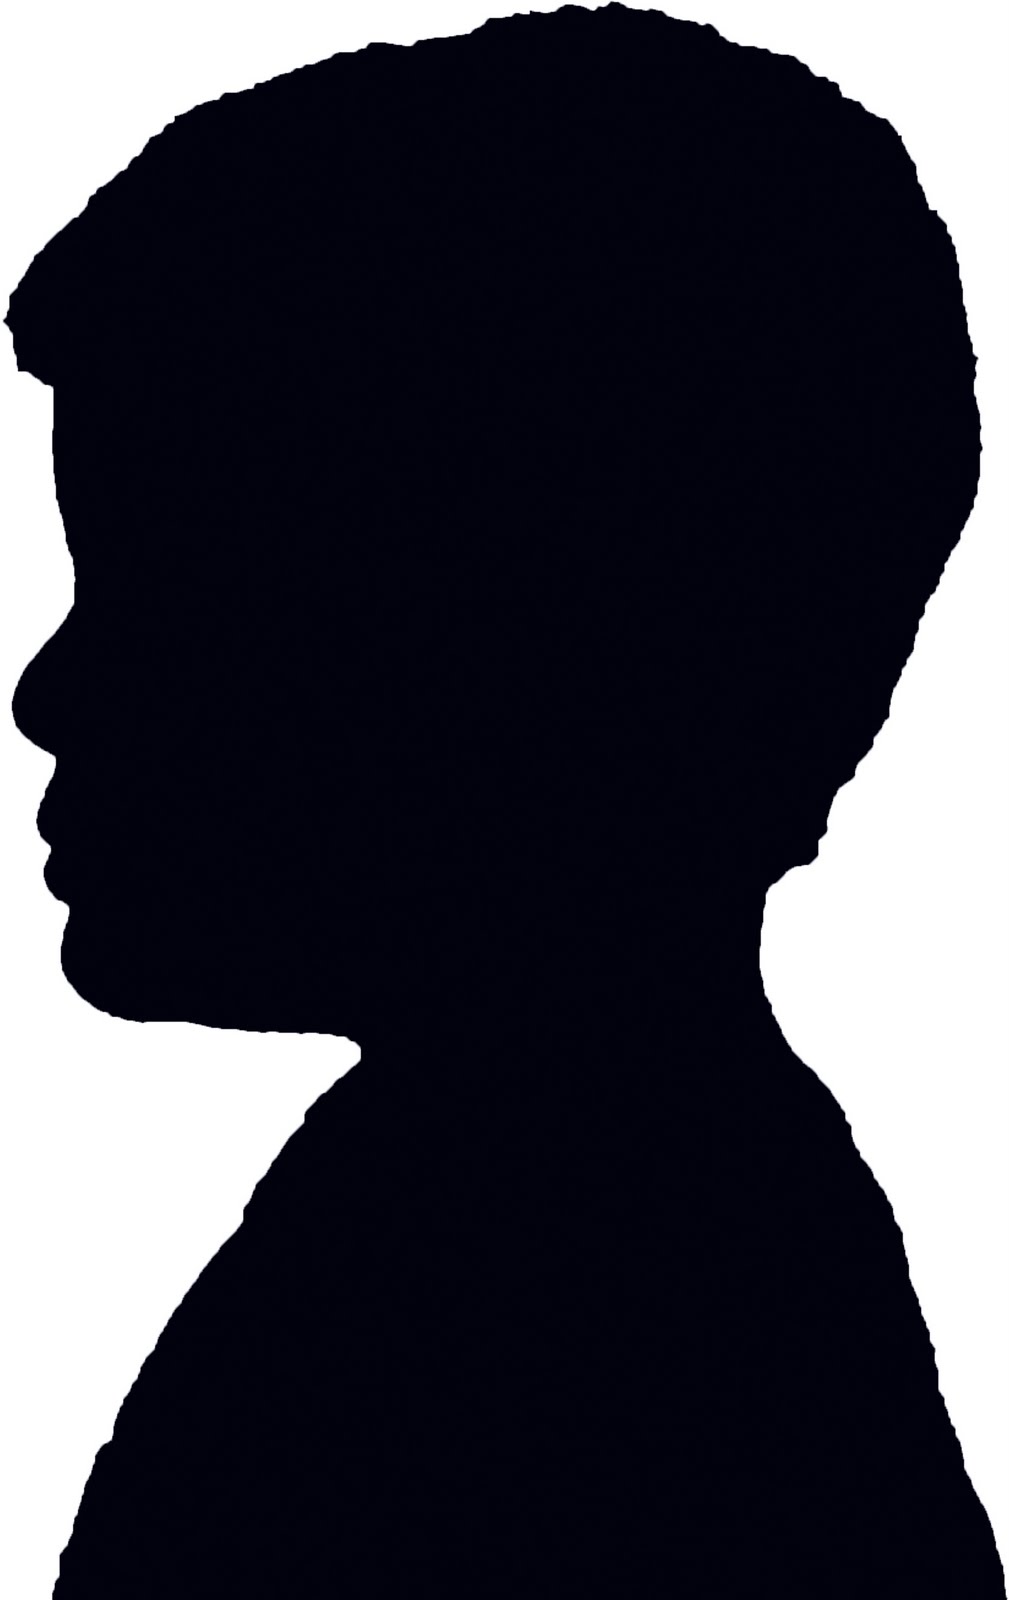 Child Silhouette - Clipart library